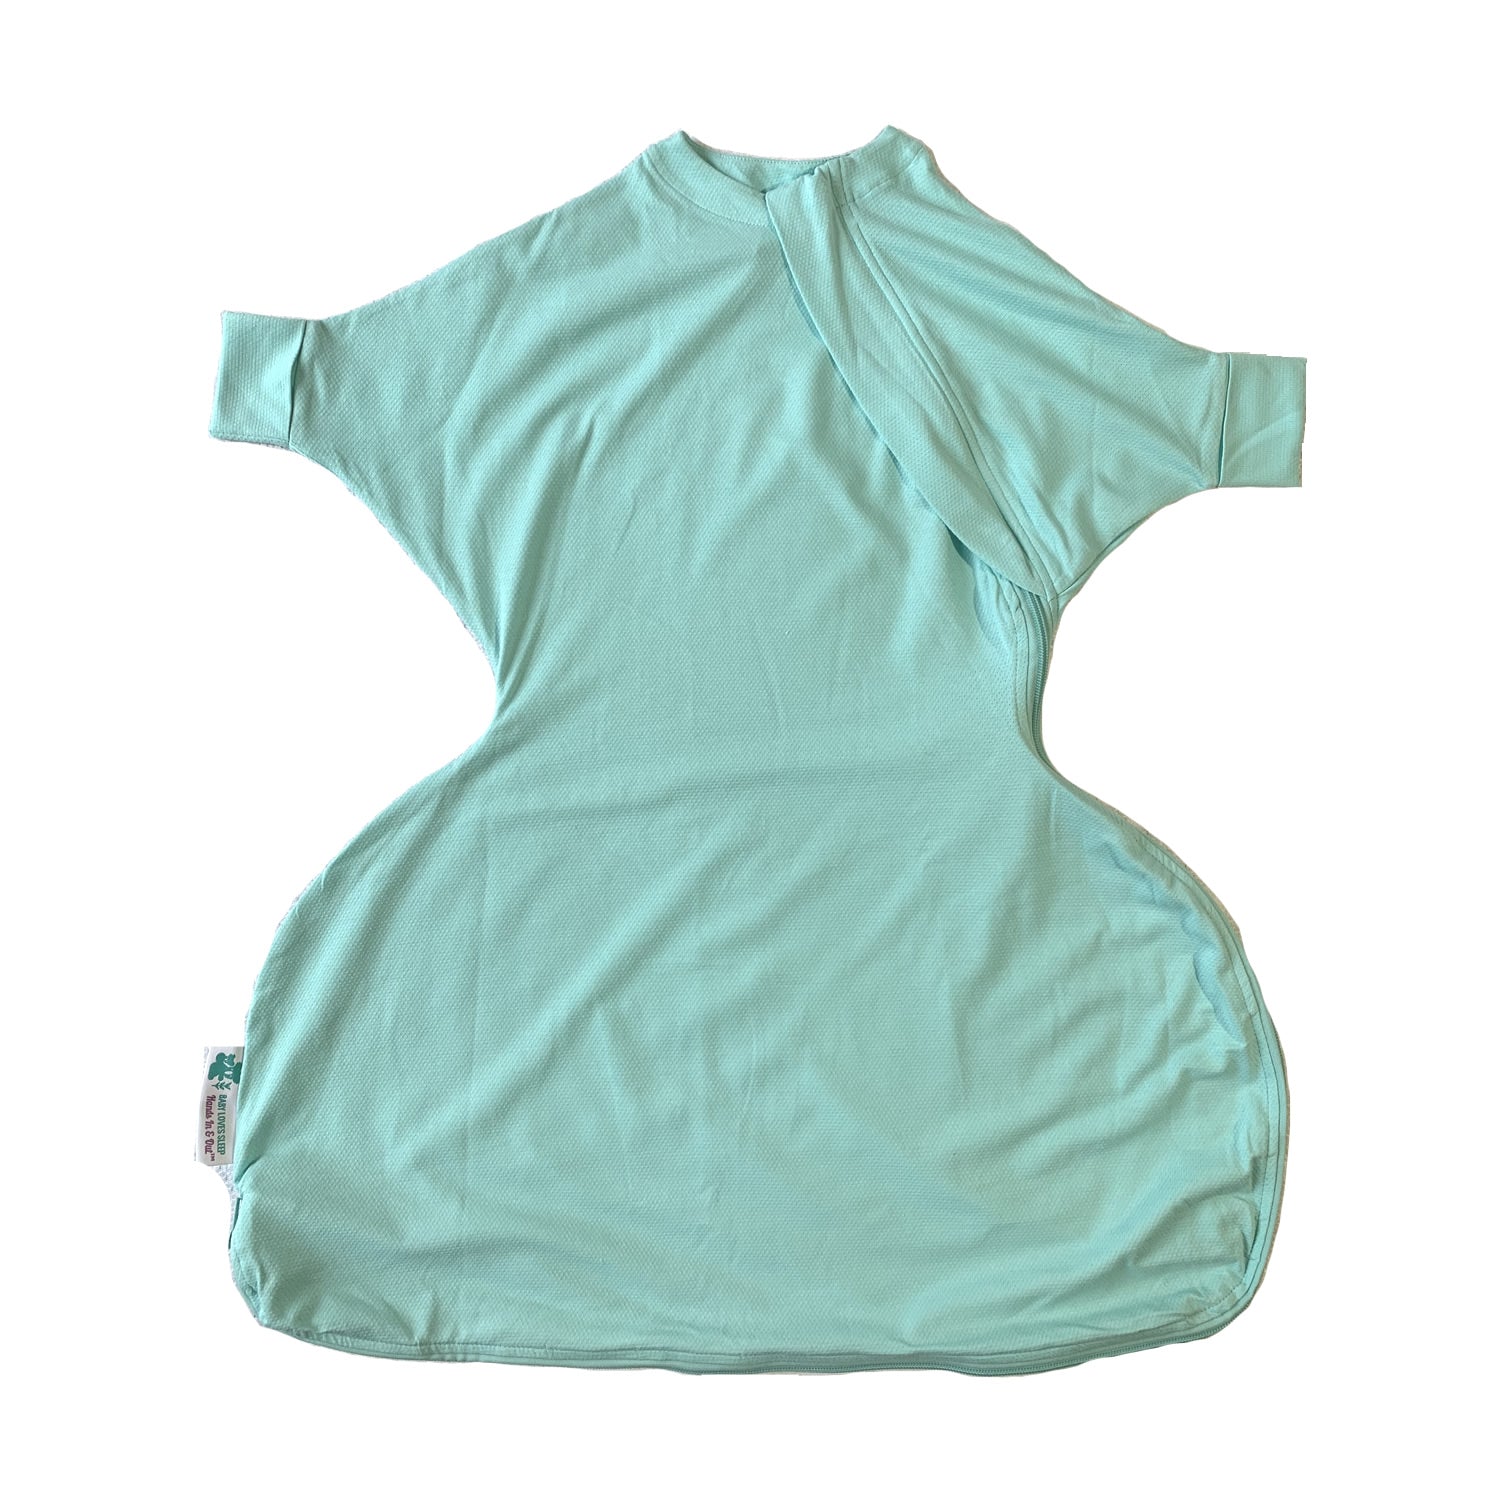 Baby sleep sack for babies wearing a hip harness due to hip dysplasia